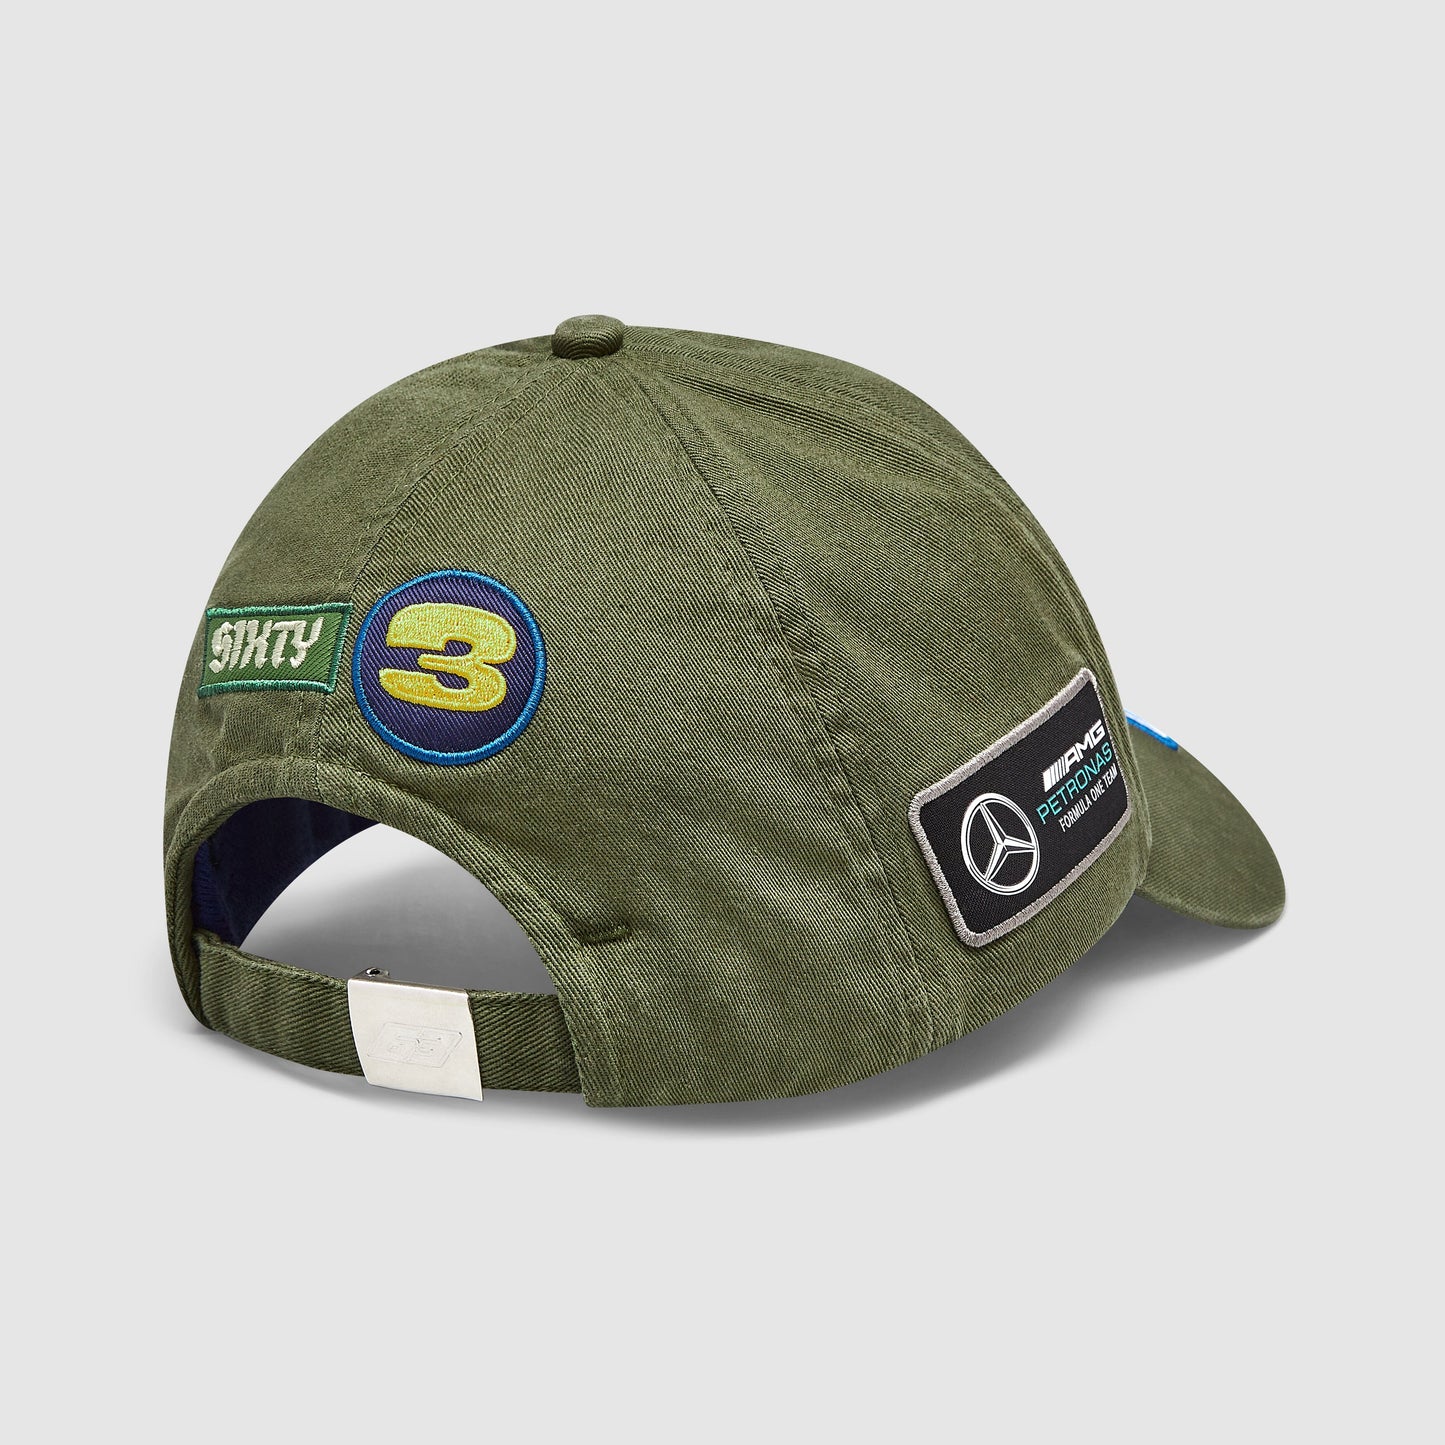 Mercedes Benz F1 Special Edition George Russell 2023 Vintage Baseball Hat-Green